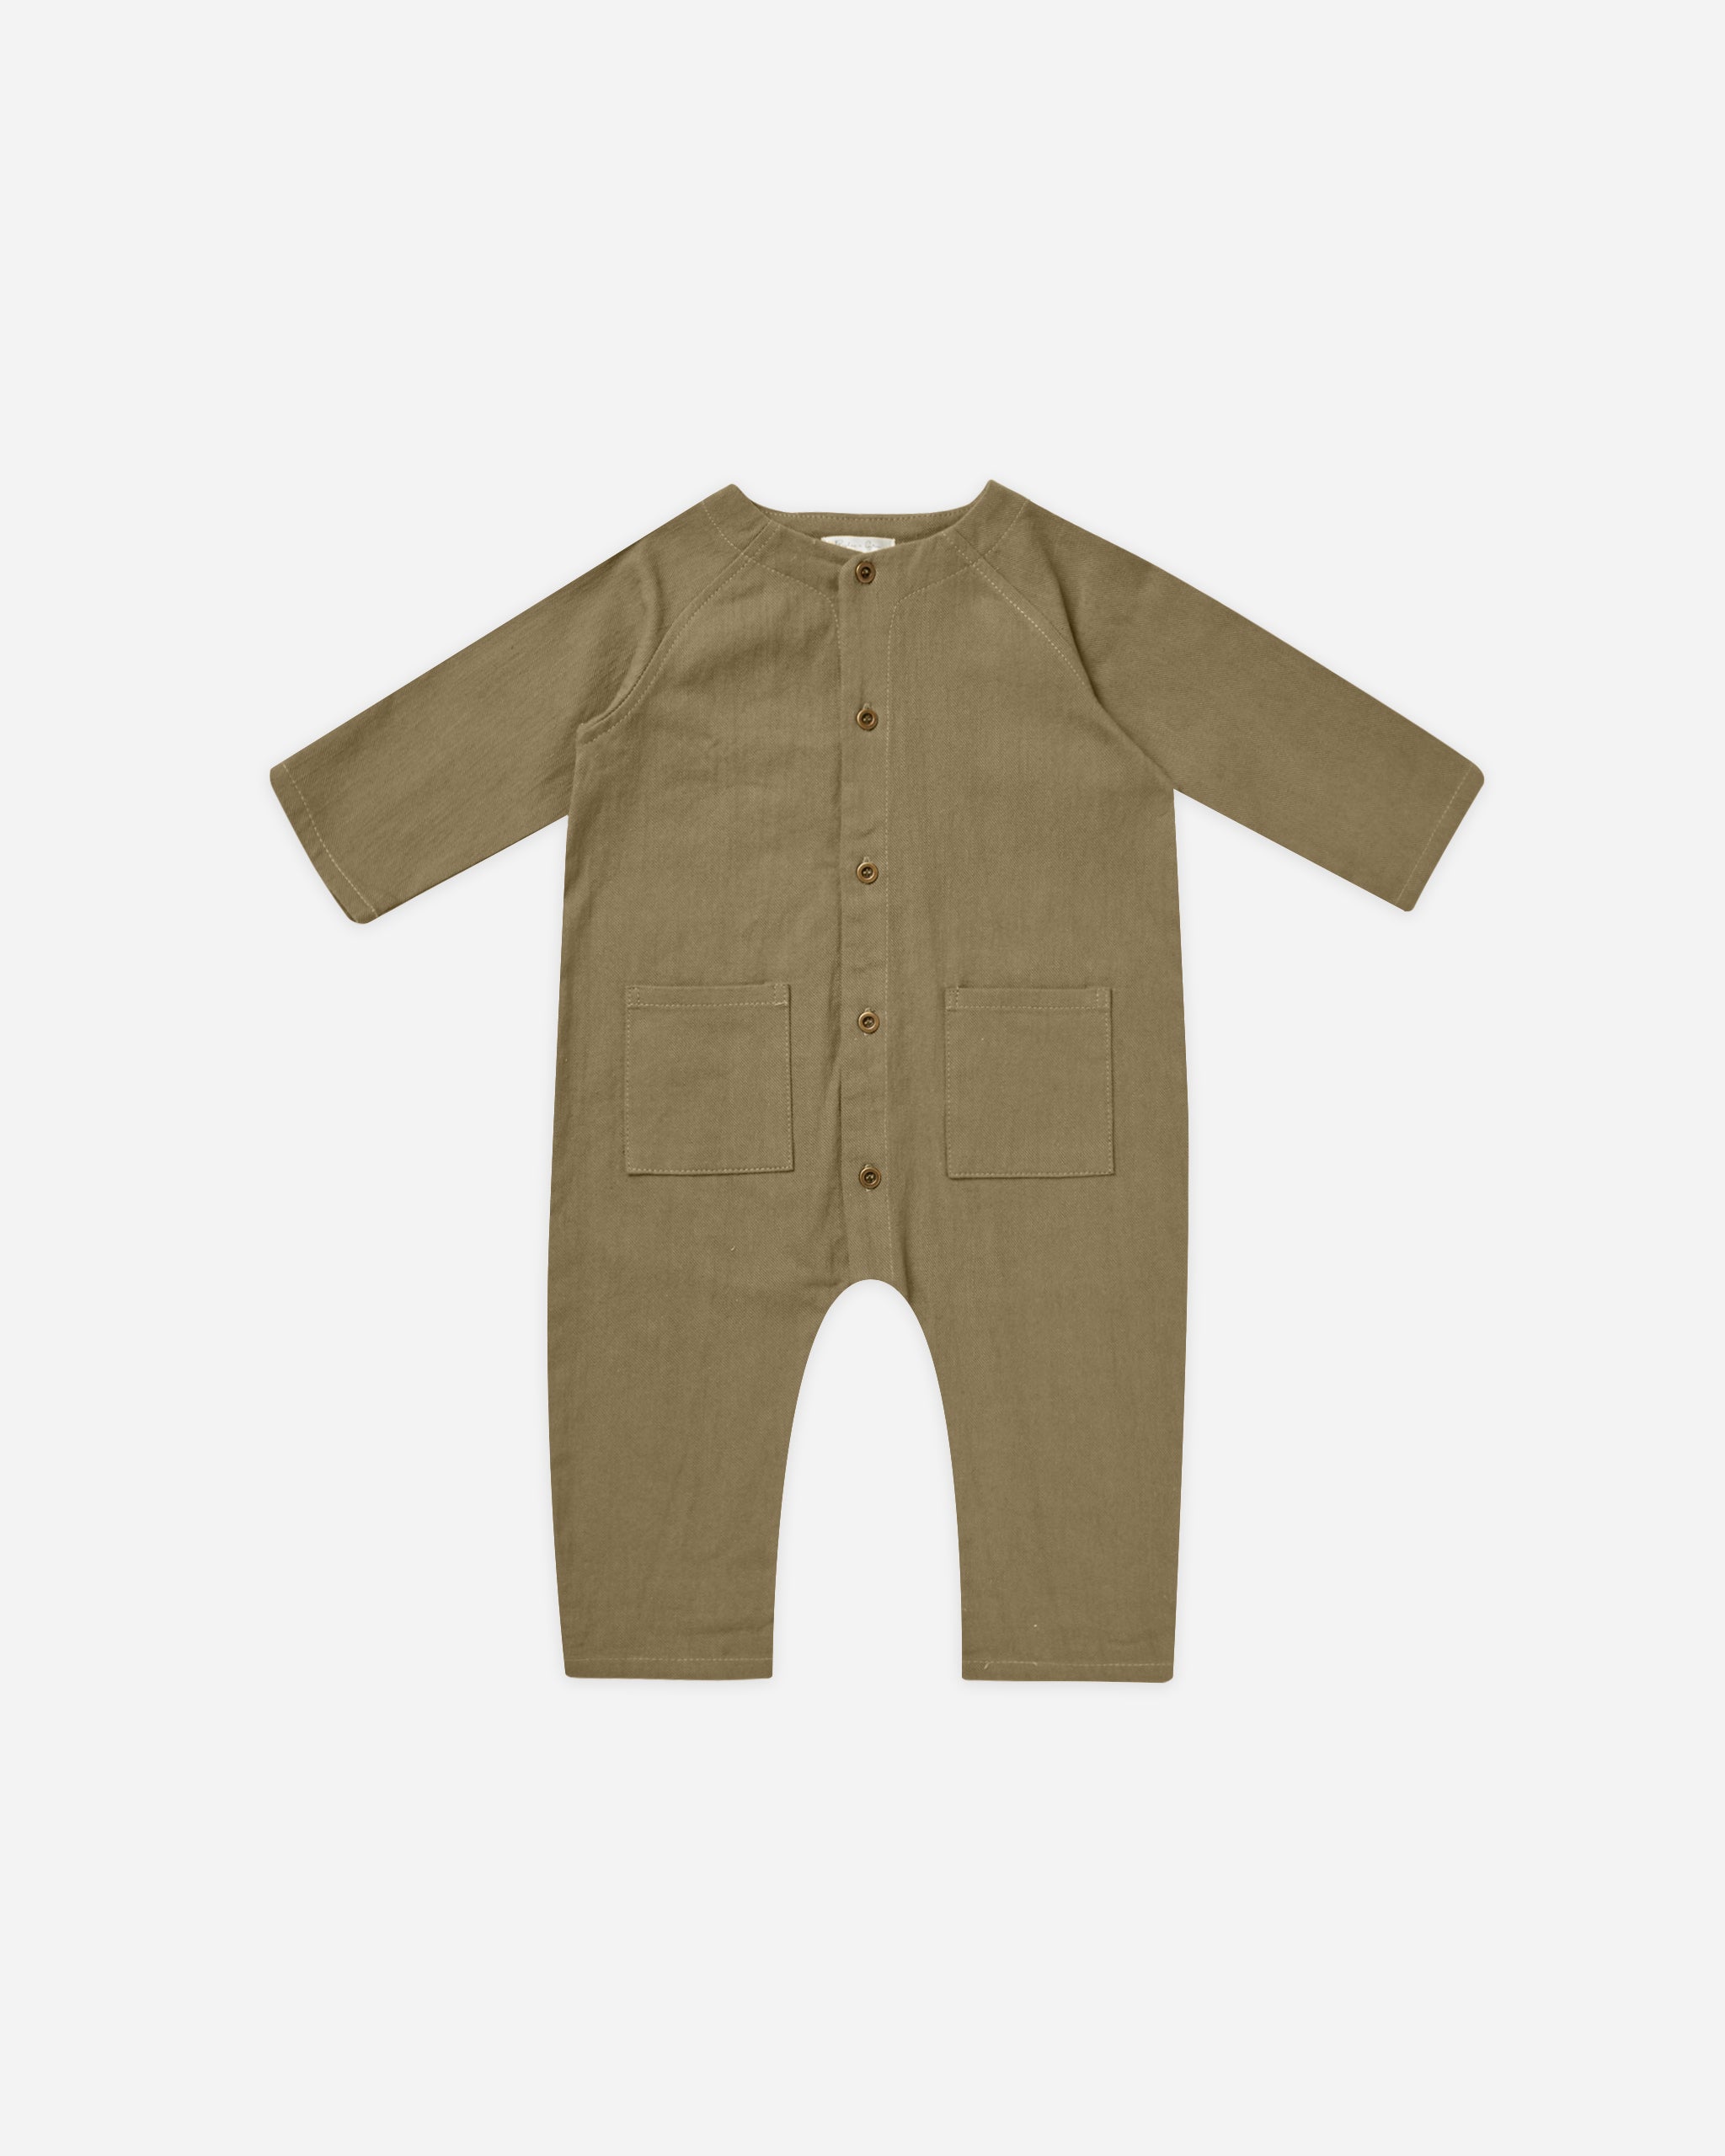 Roman Romper || Moss - Rylee + Cru | Kids Clothes | Trendy Baby Clothes | Modern Infant Outfits |